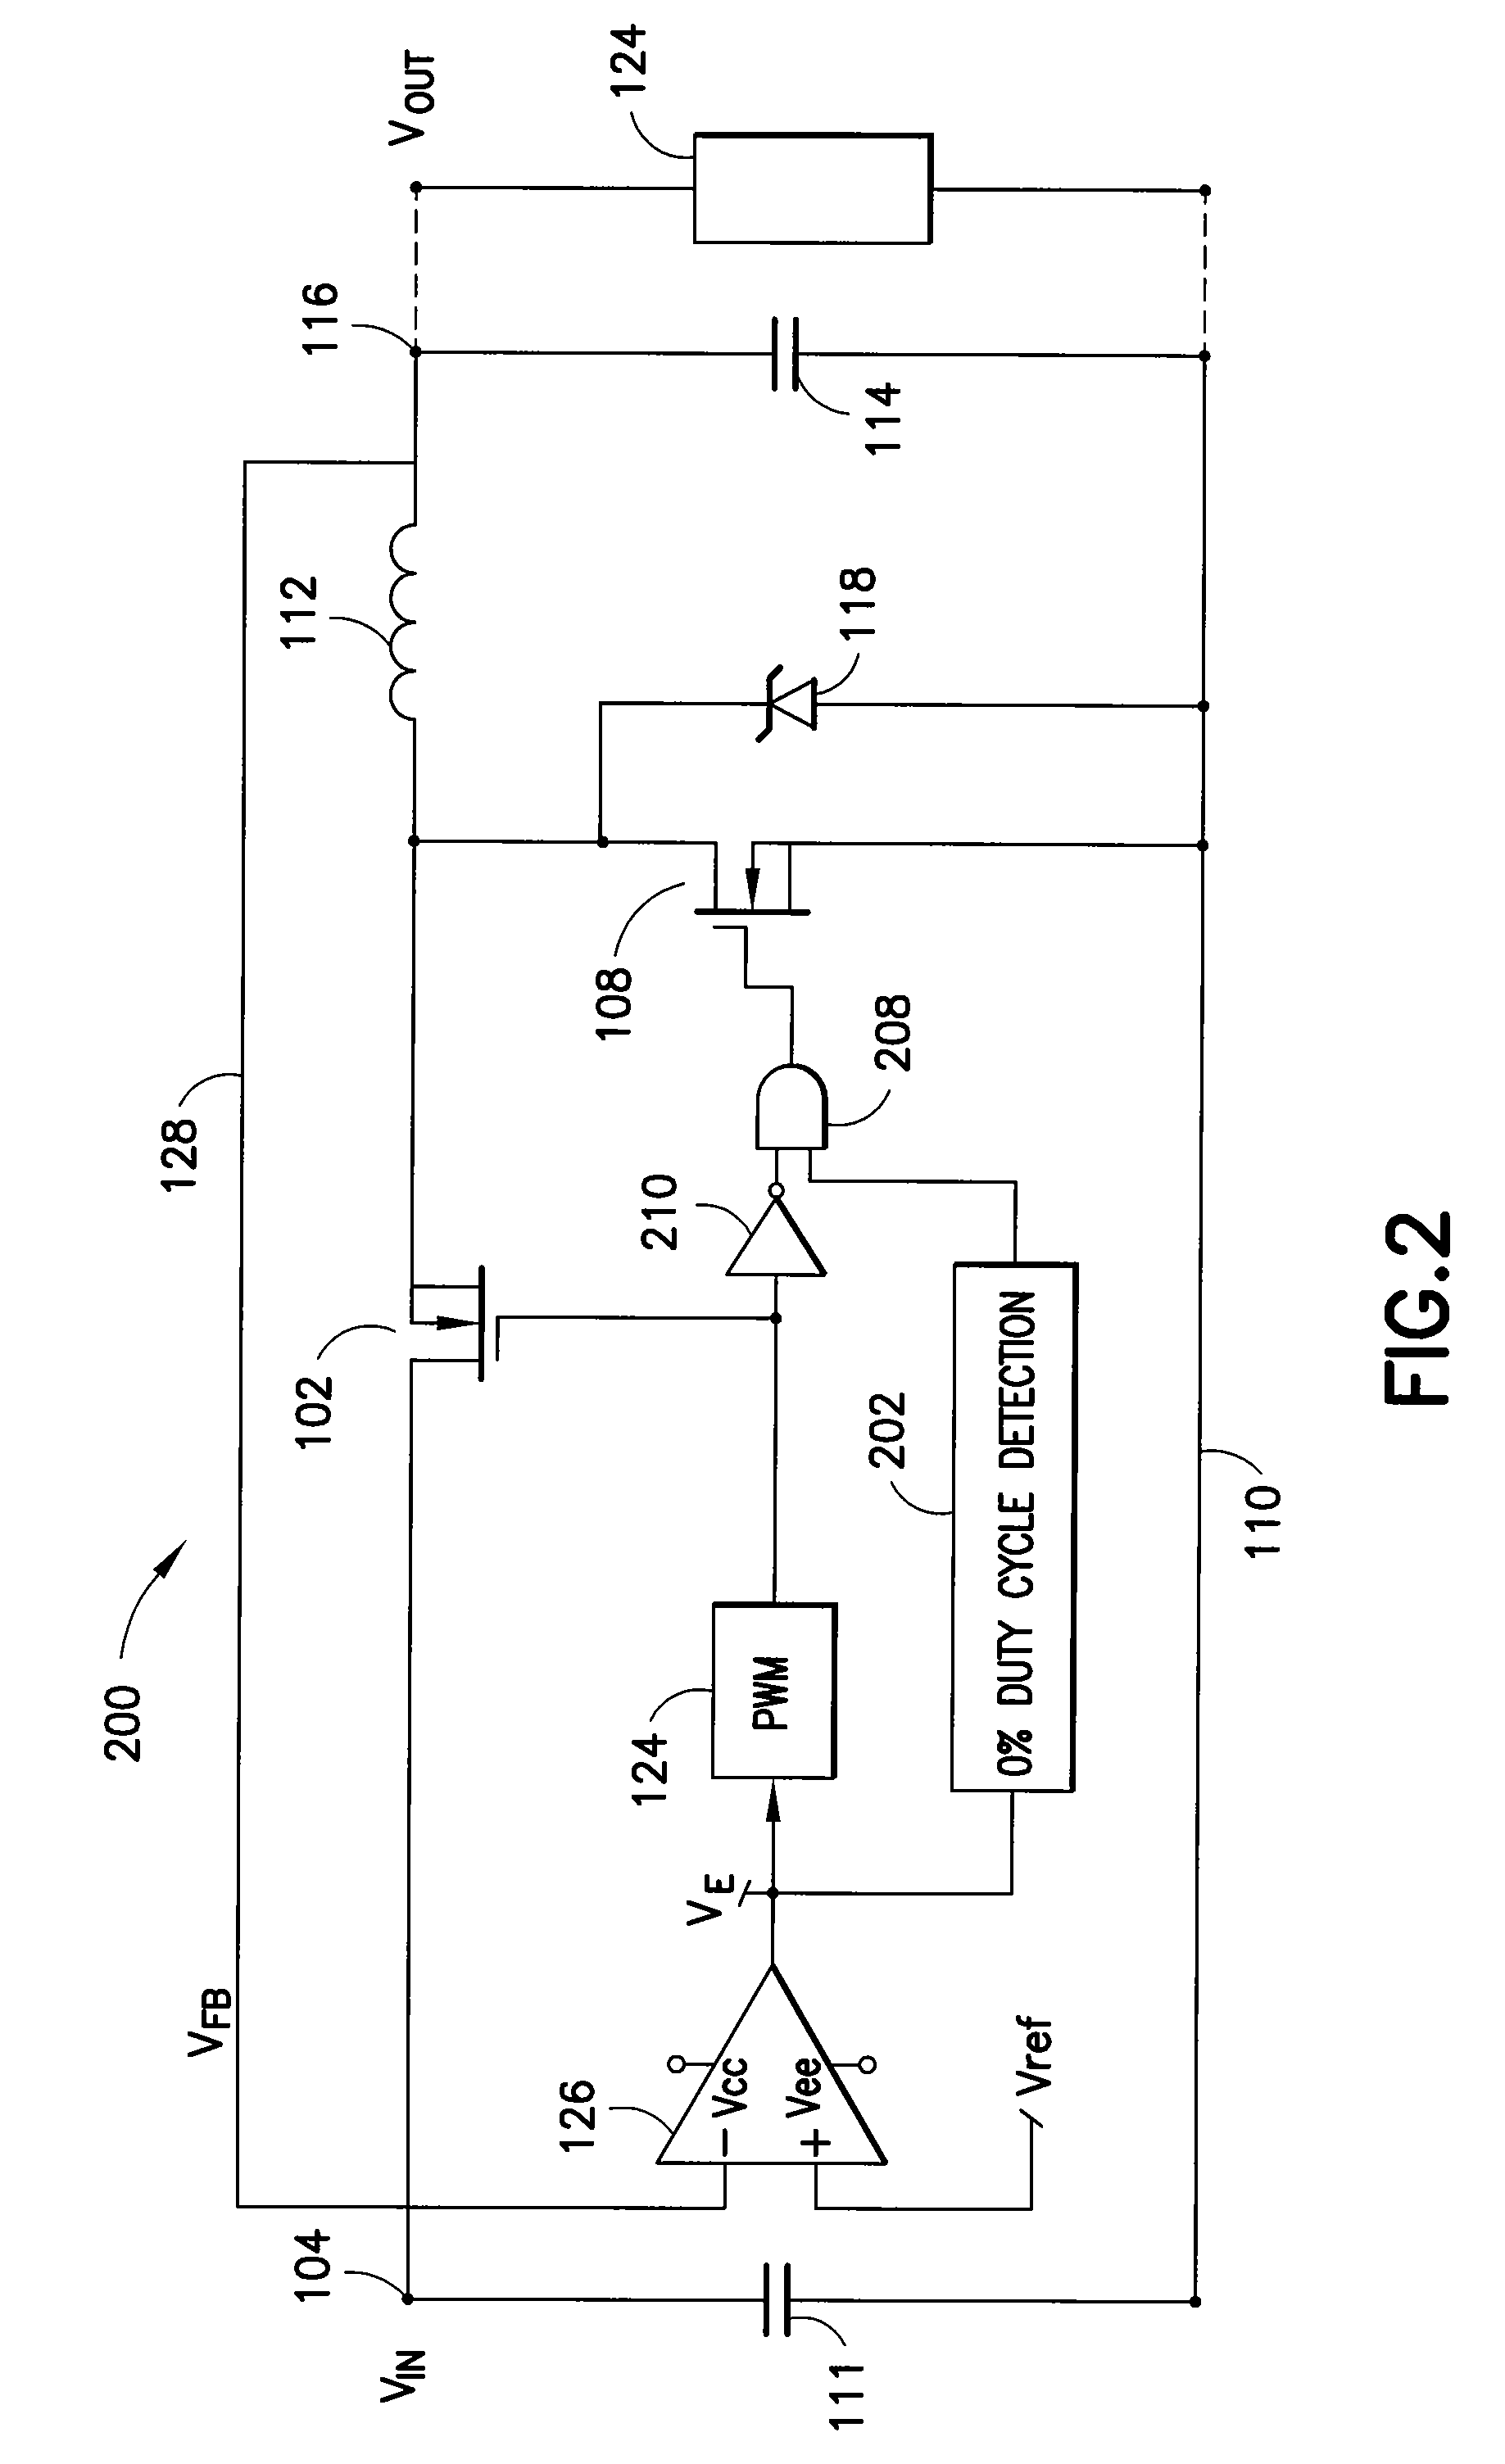 Buck converter having improved transient response to load step down